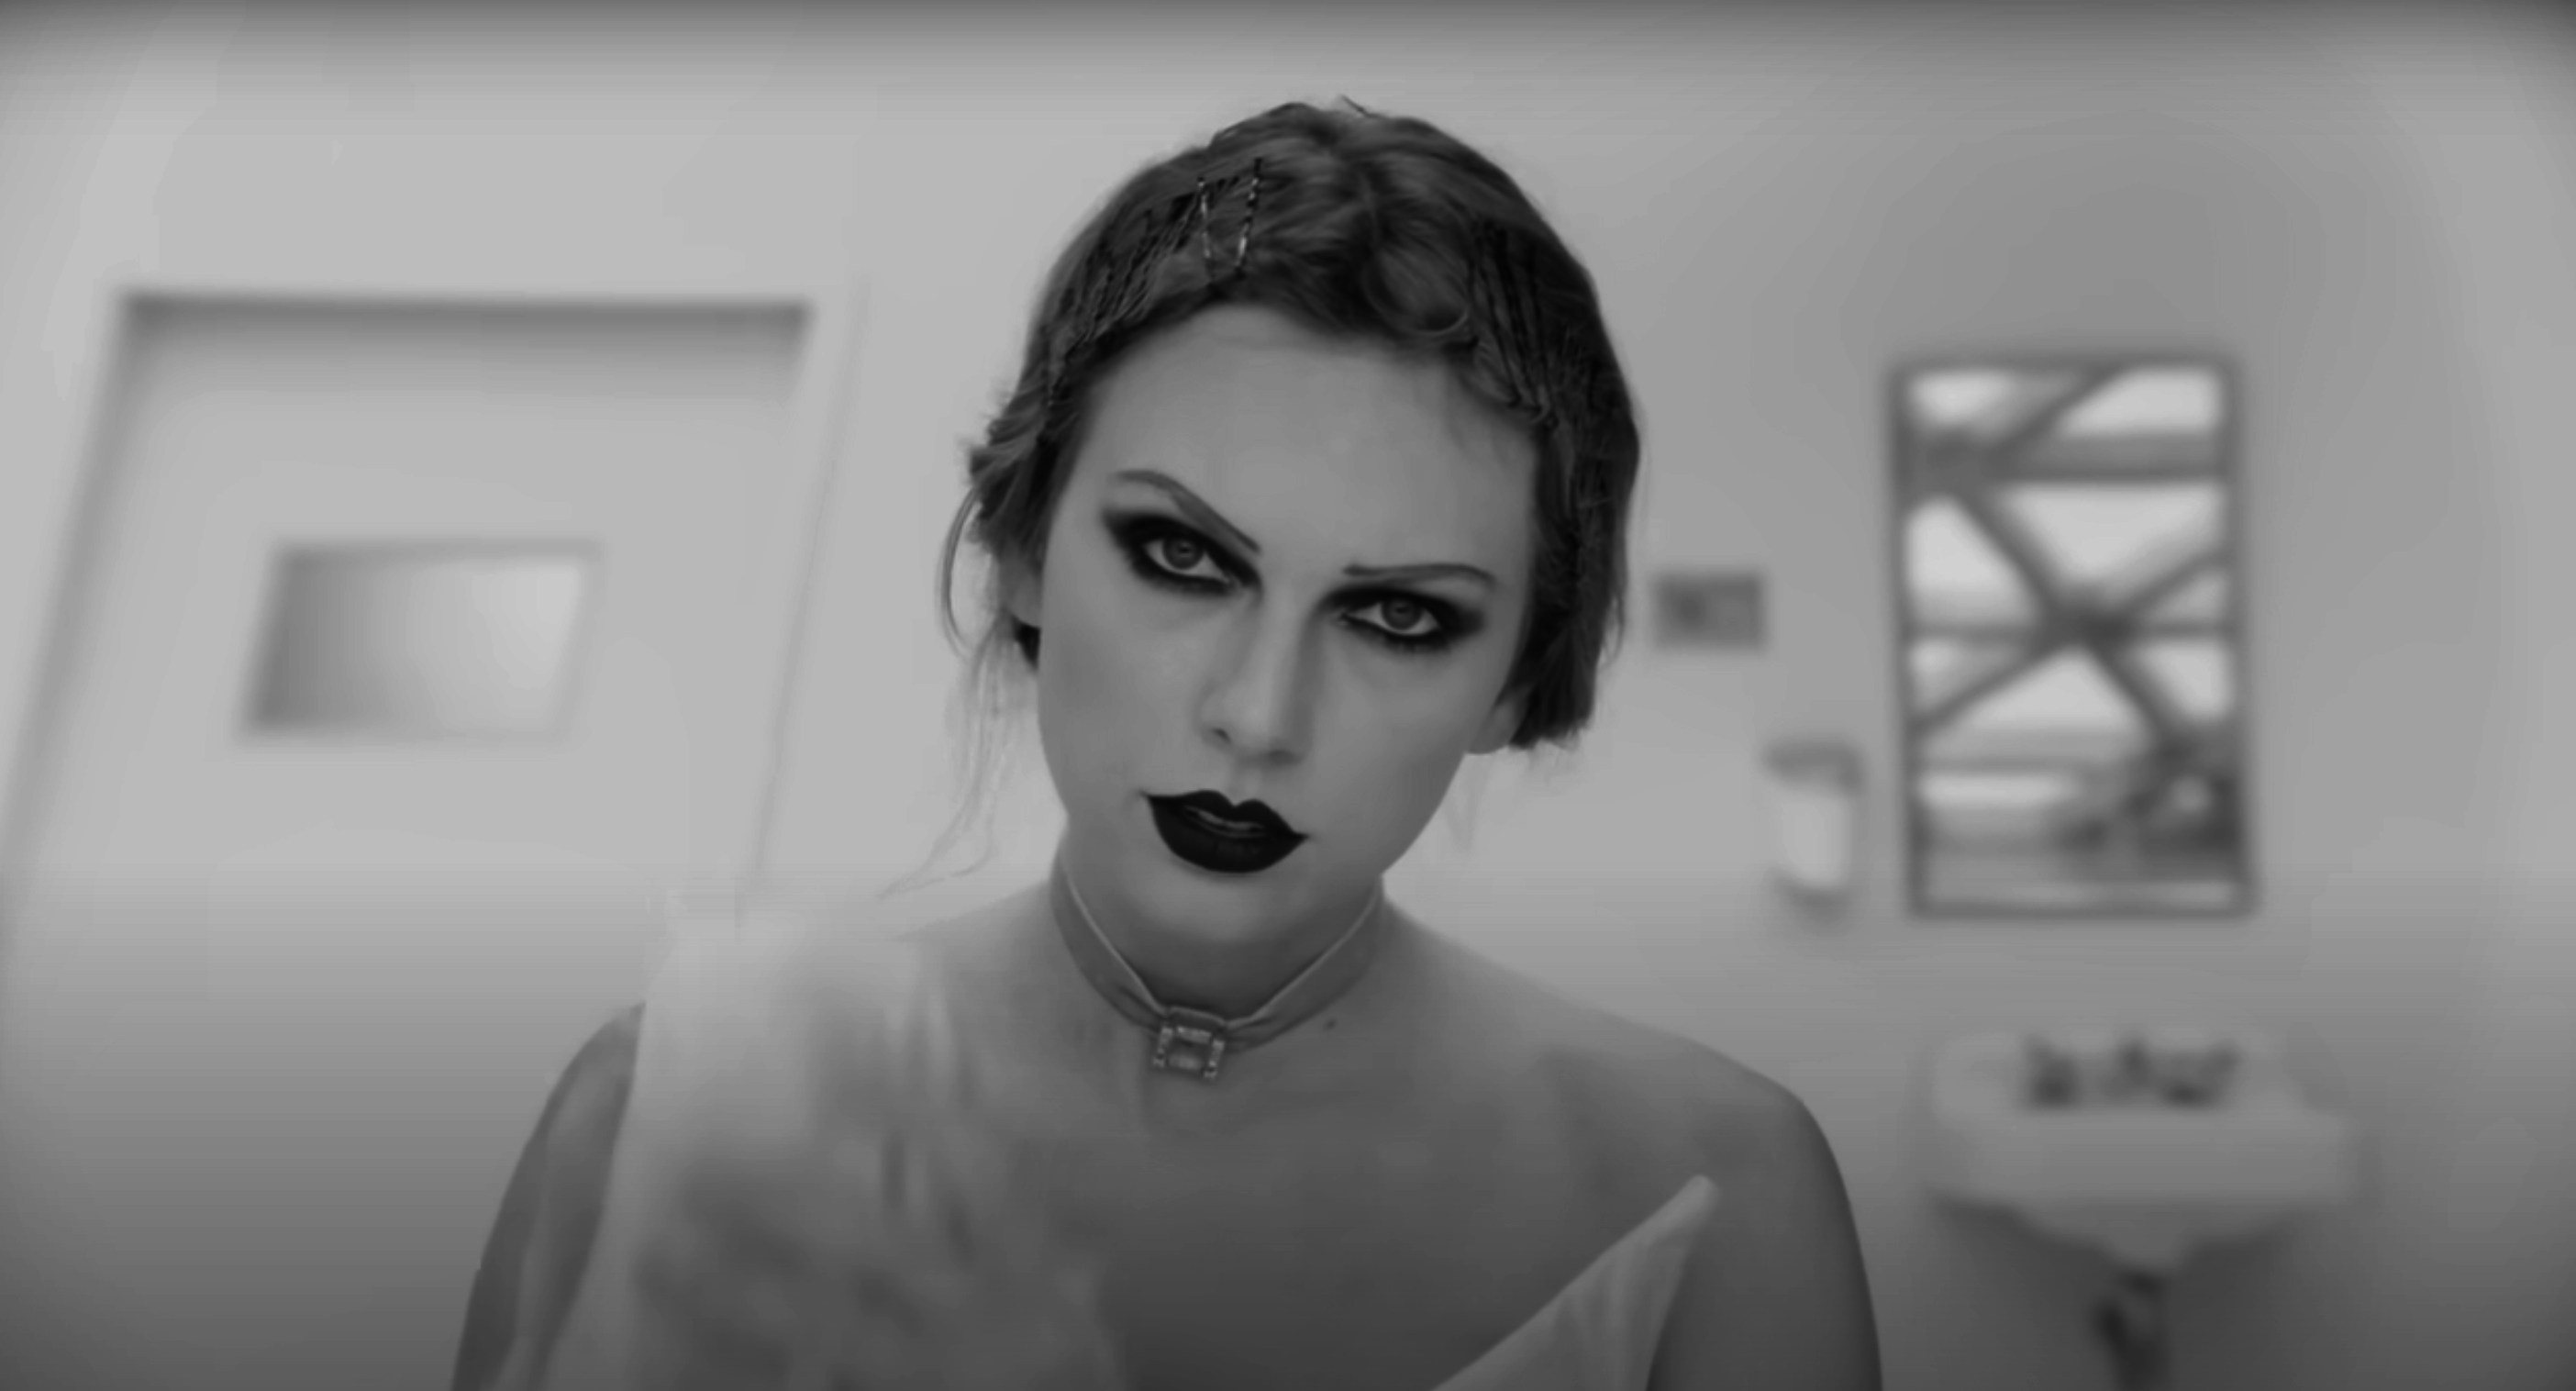 Taylor Swift in a dramatic makeup look, gazing intensely at the camera